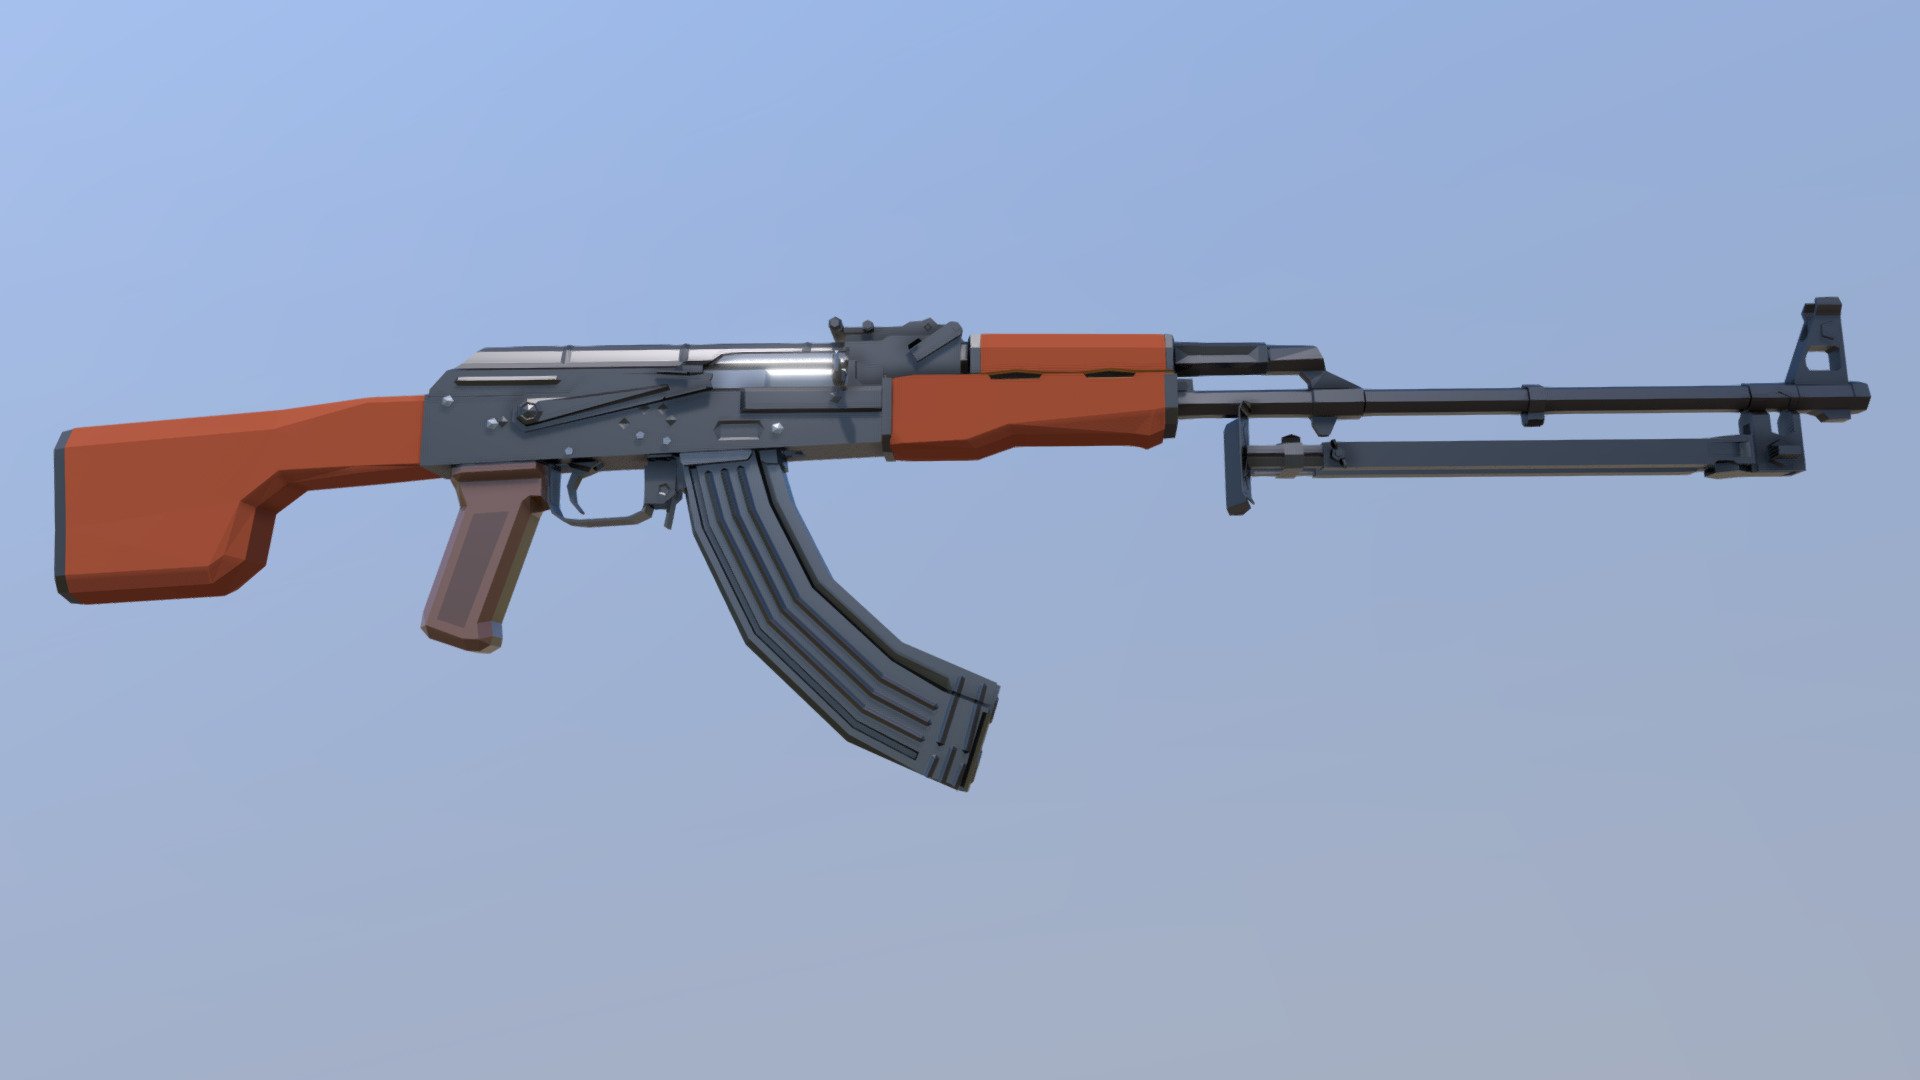 Low-Poly model of a russian RPK light machine gun with a 45-round magazine. The RPK was originally developed alongside the AK, and is almost identical to it, with the exception for the thicker, longer barrel for longer automatic fire and harder-hitting rounds, and a bulged front trunnion and receiver that, together with its stock and bipod, makes the RPK easily recognizable 3d model